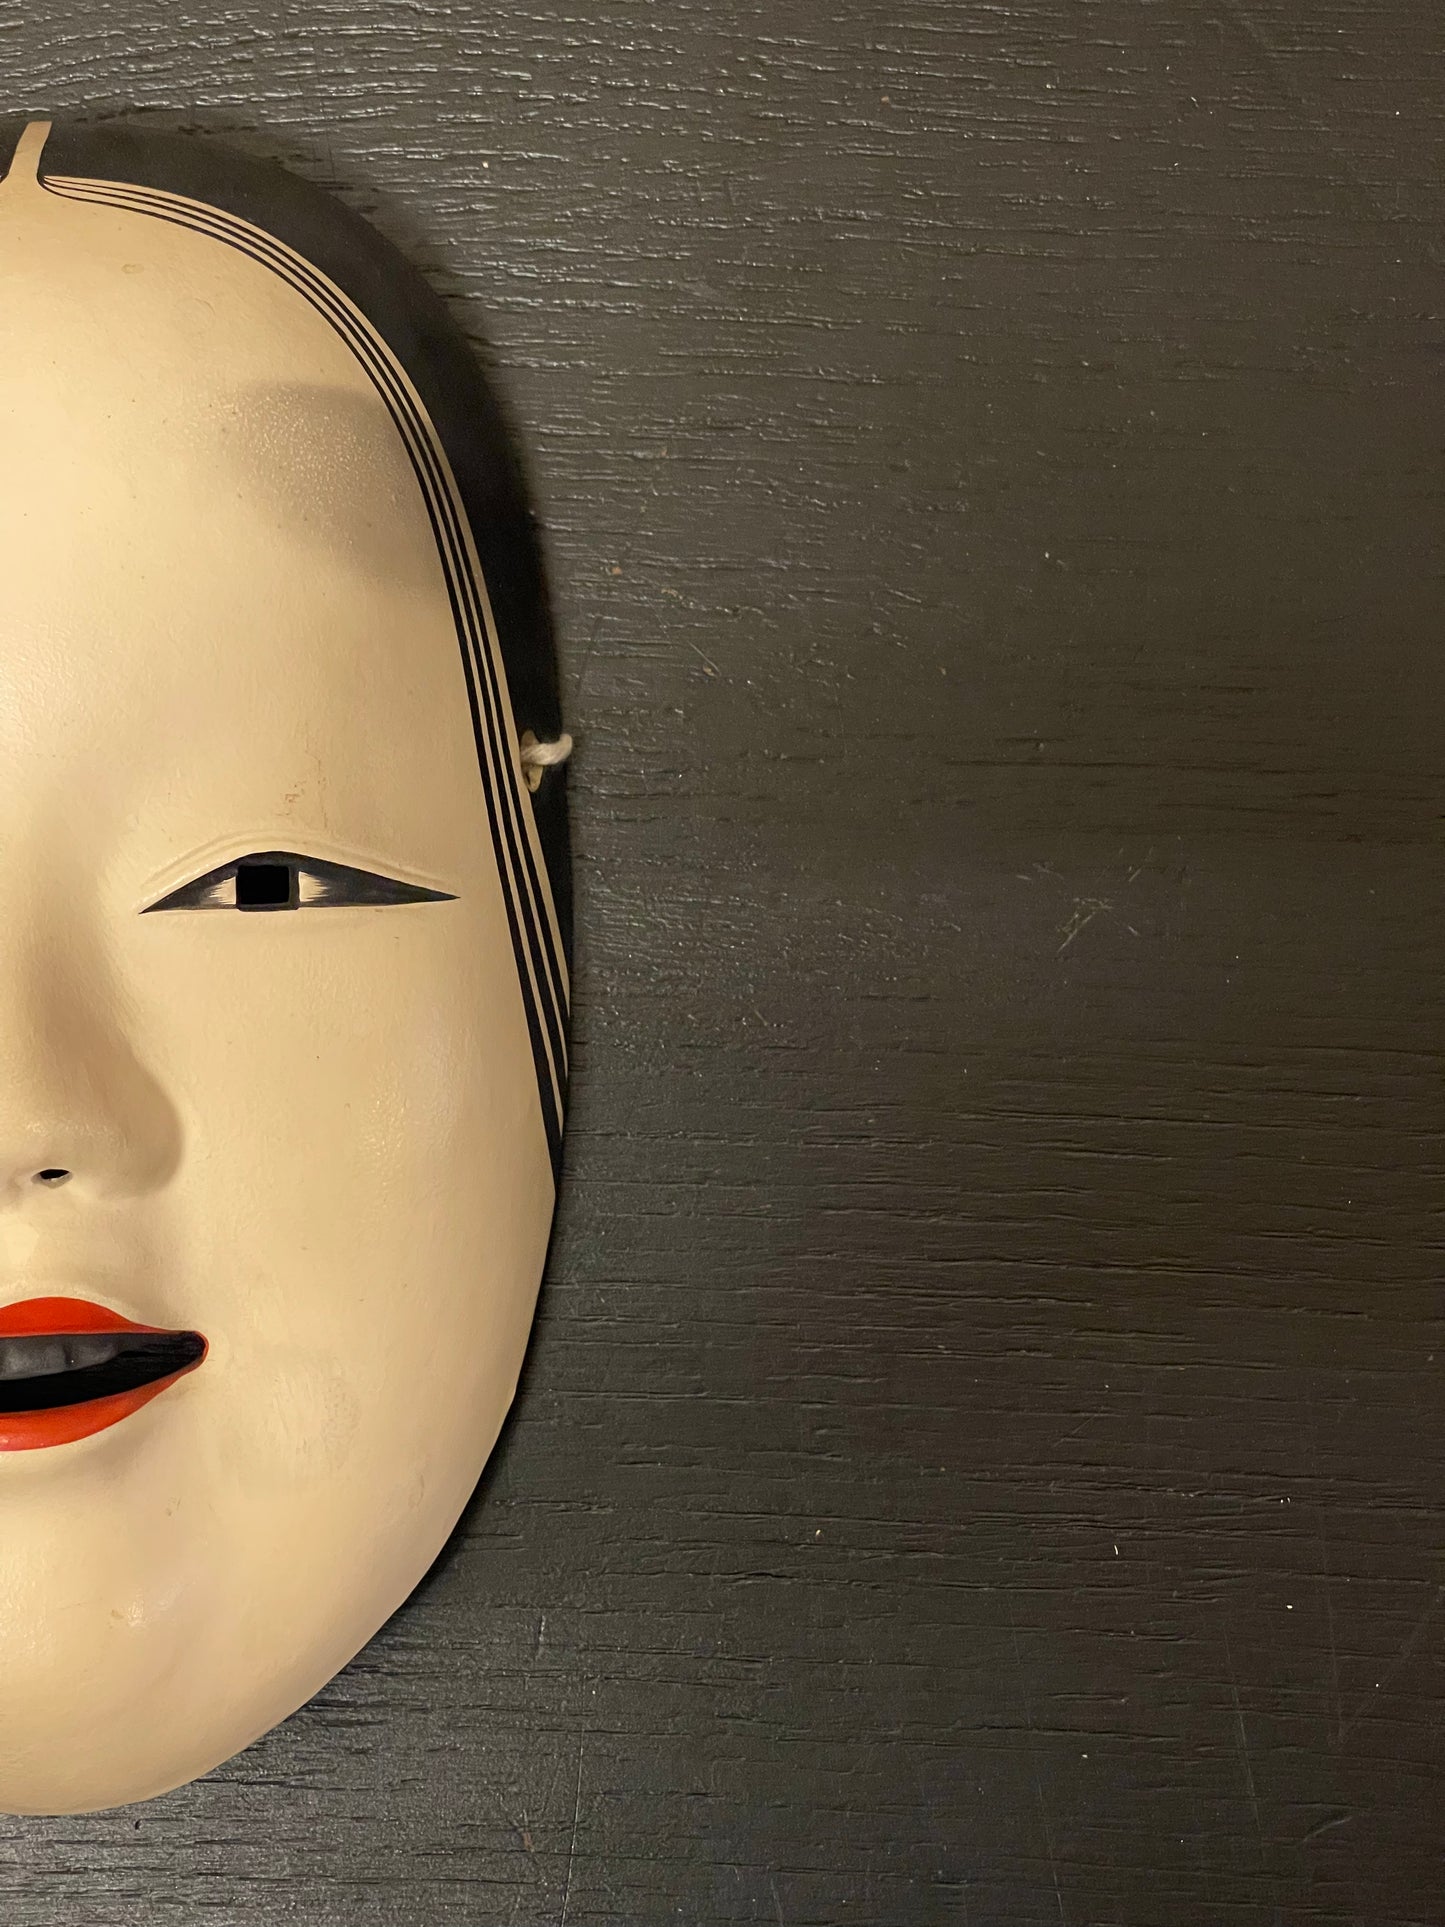 Vintage Japanese Noh Mask Of A Young Woman ( Waka-onna ) By Suzuki Nohin